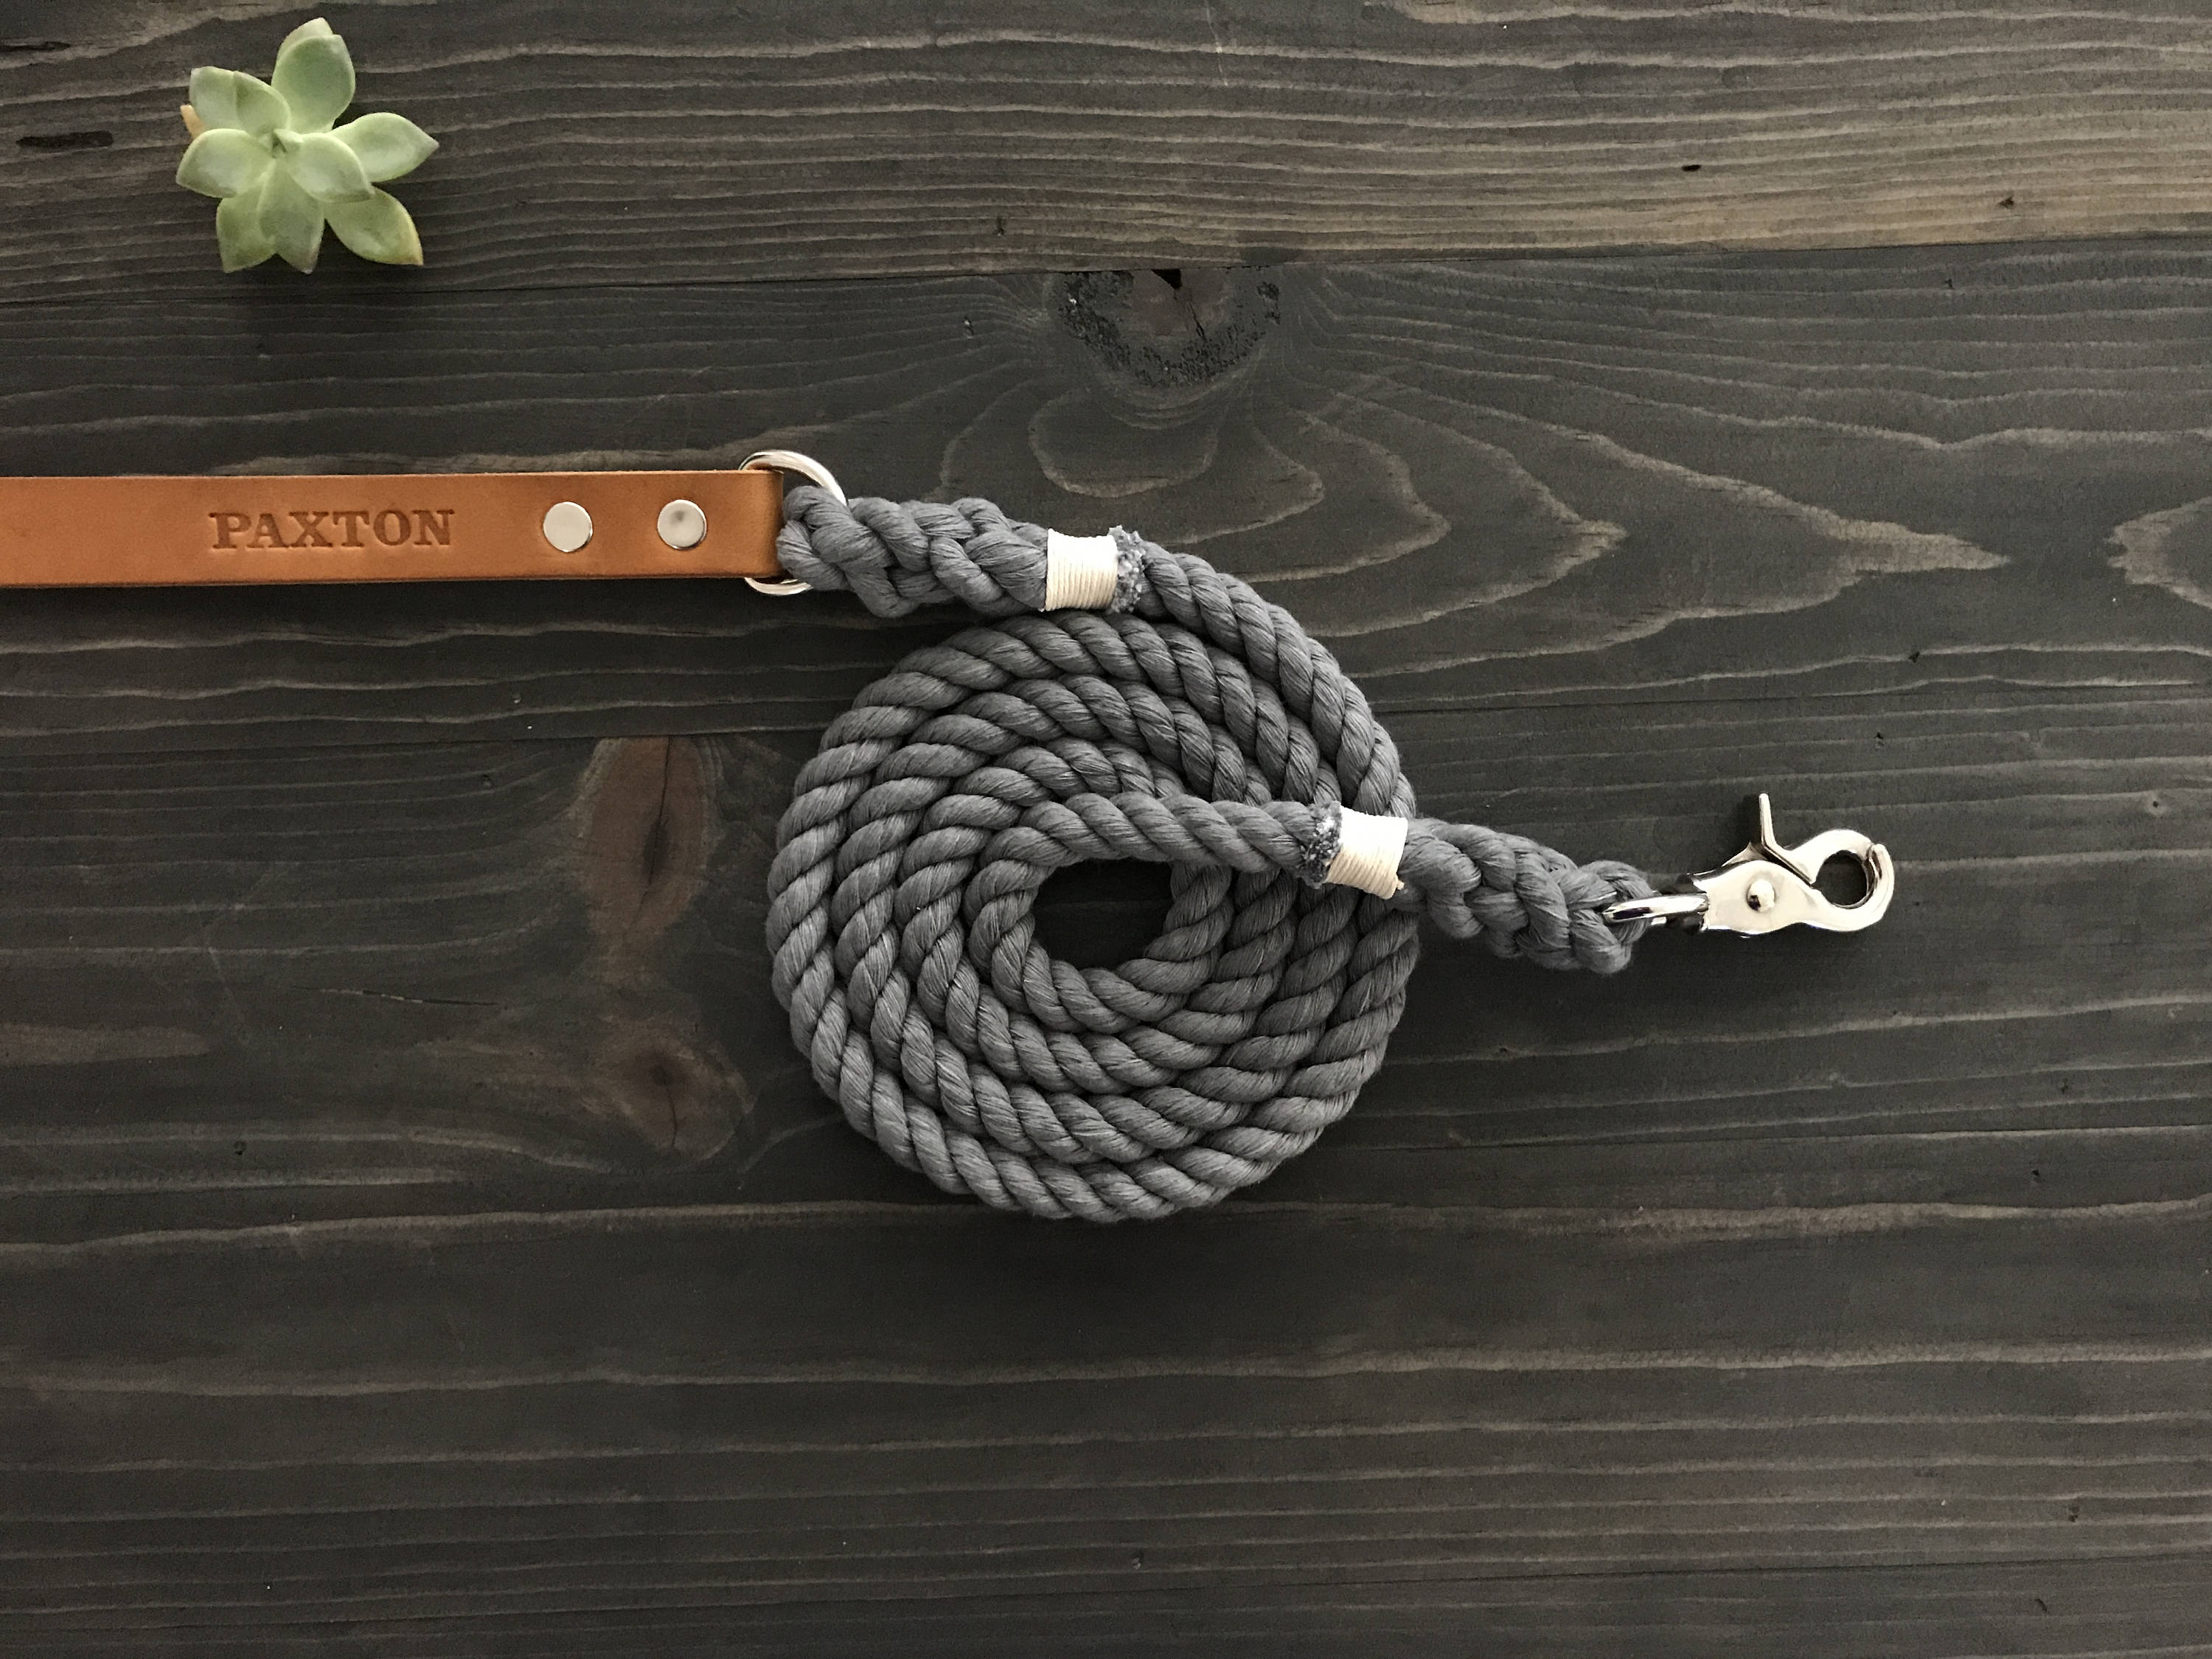 Grey Cotton Rope Leash with Leather Accents